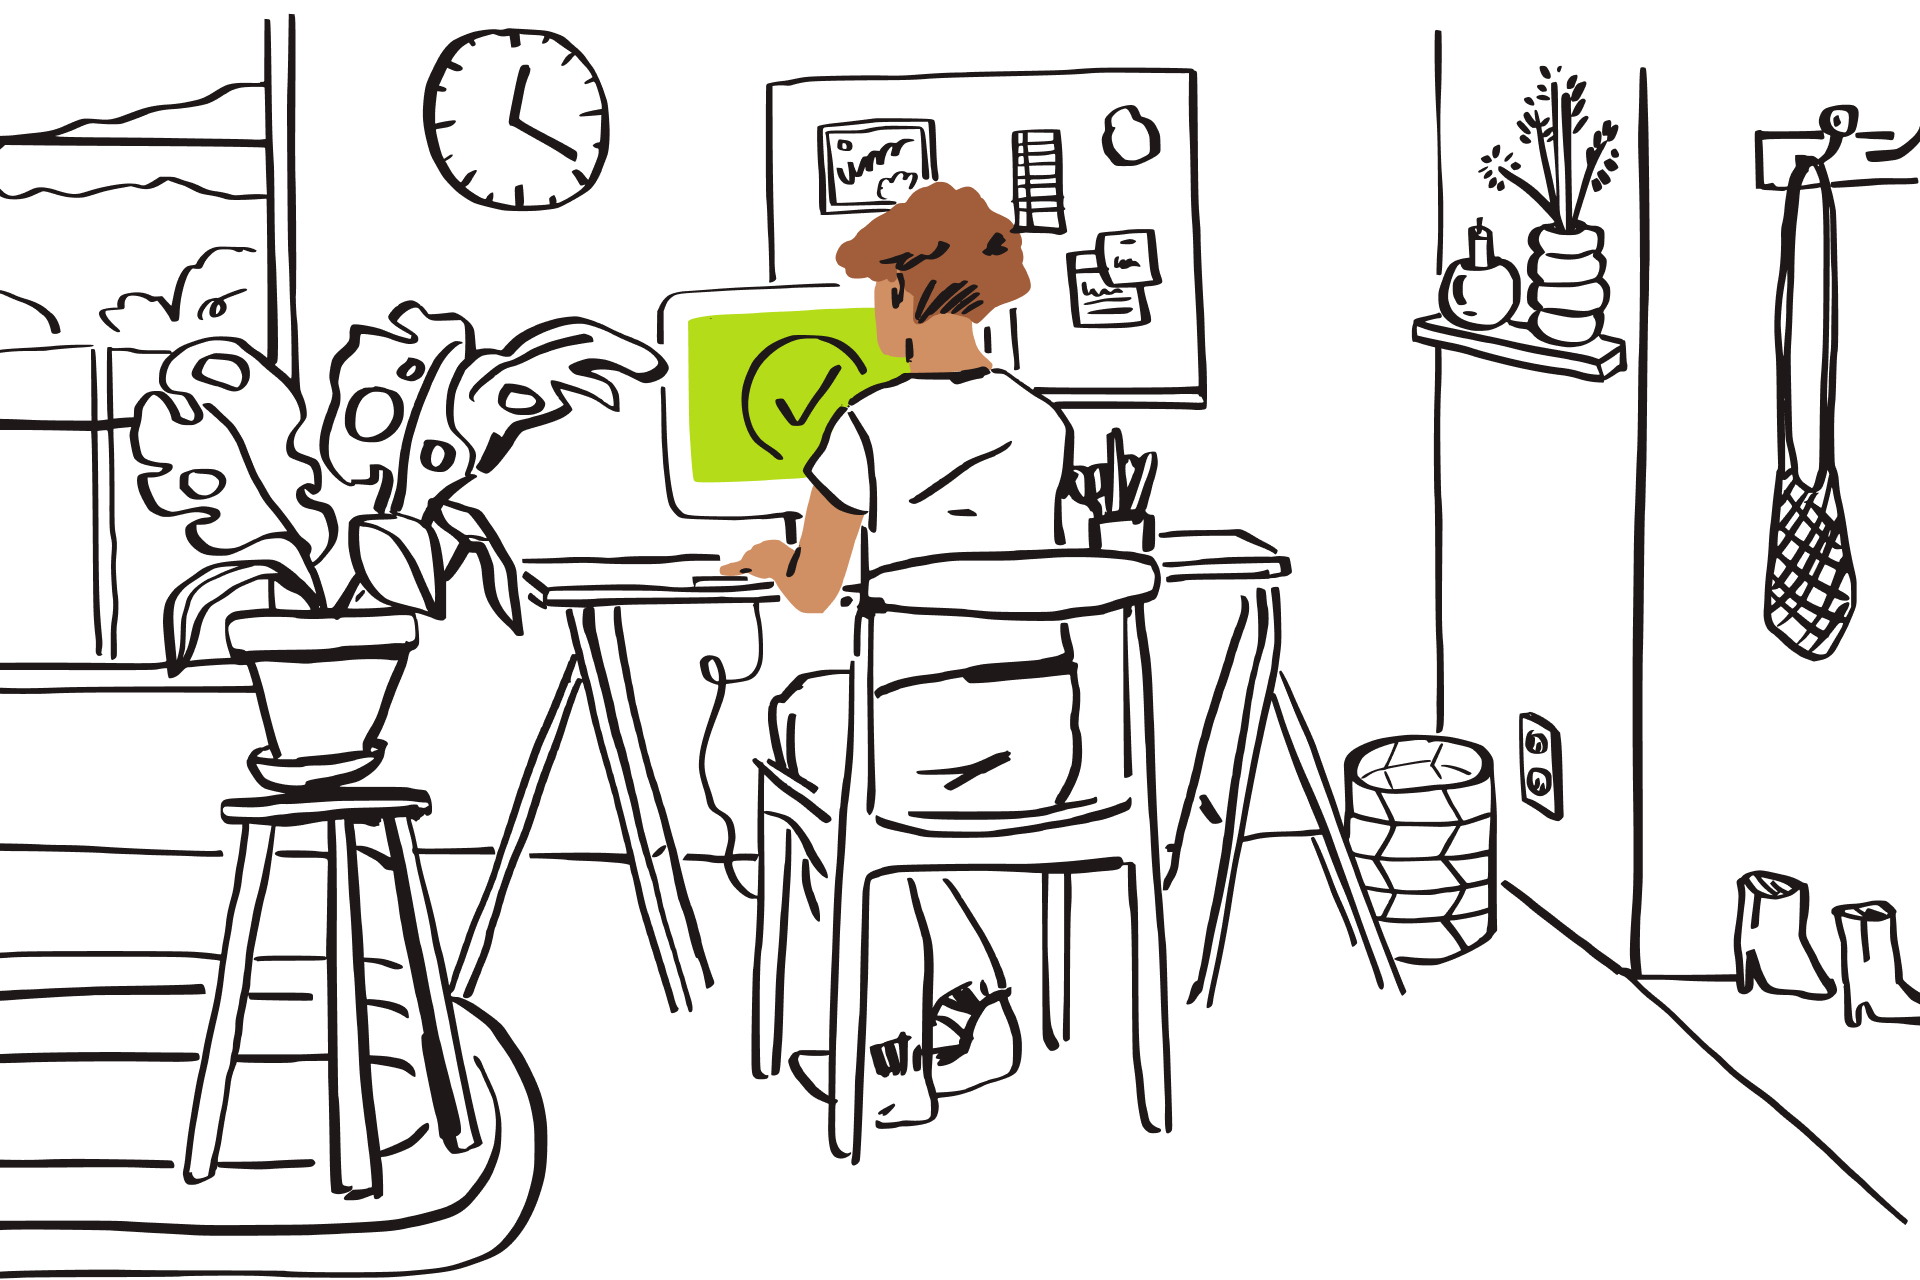 Black line illustration of a room with person typing at a computer with a green screen and check icon